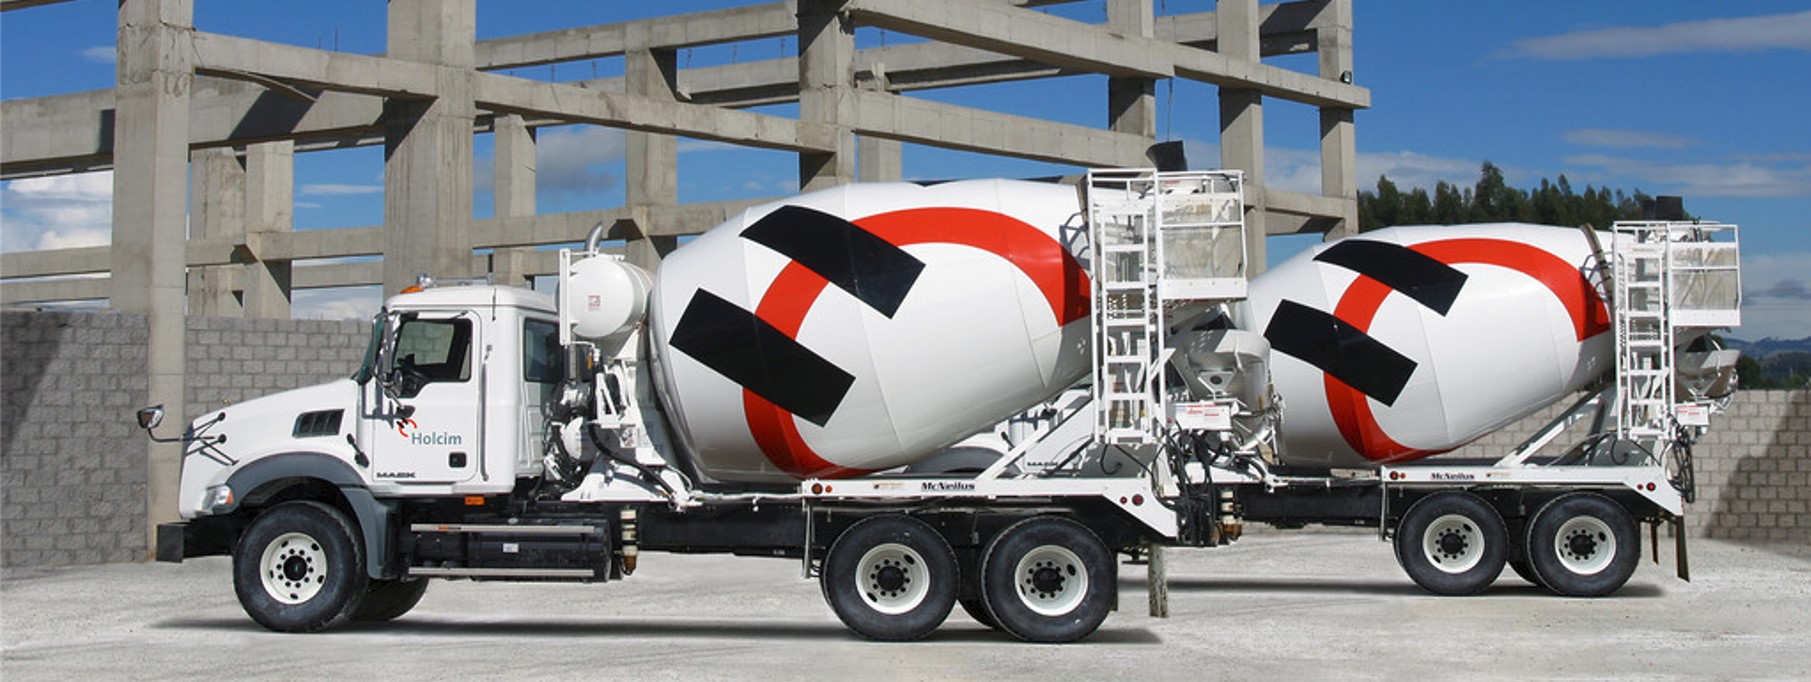 Two concrete mixer trucks of Holcim Inc parked besides a construction site.